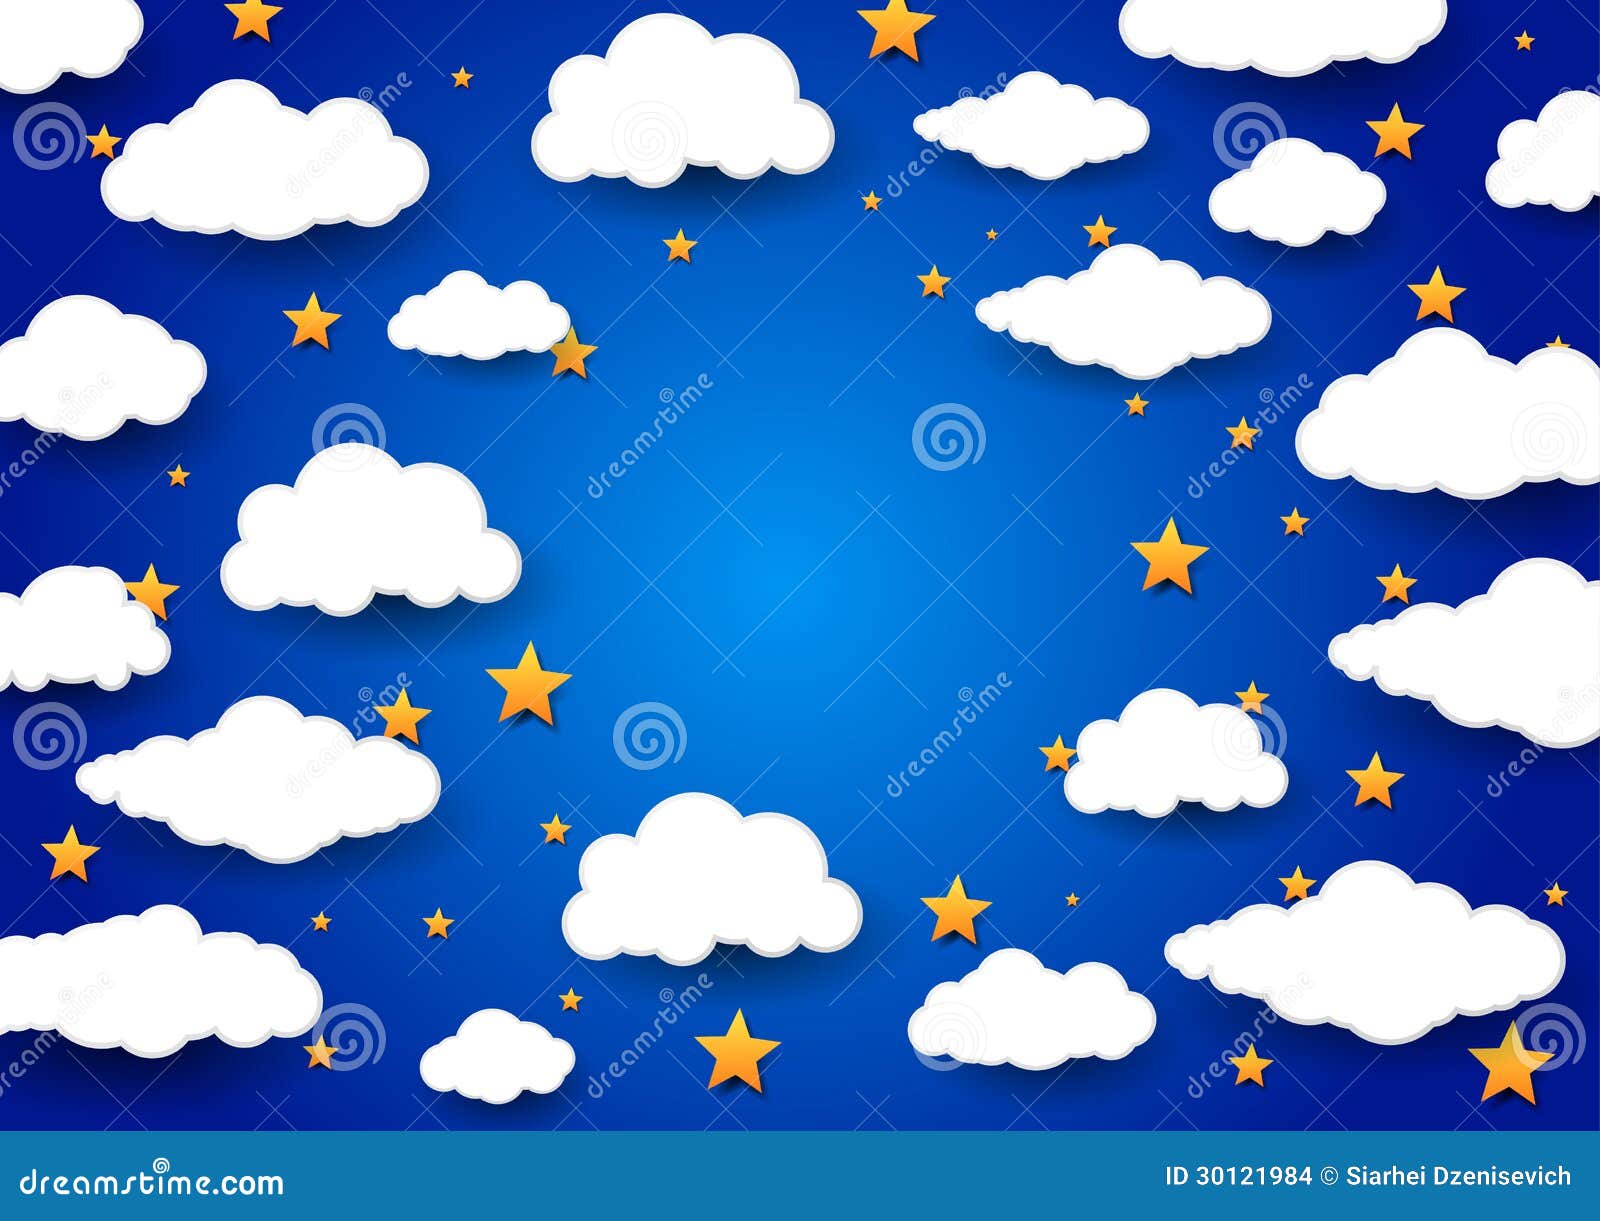 clipart sky background - photo #42